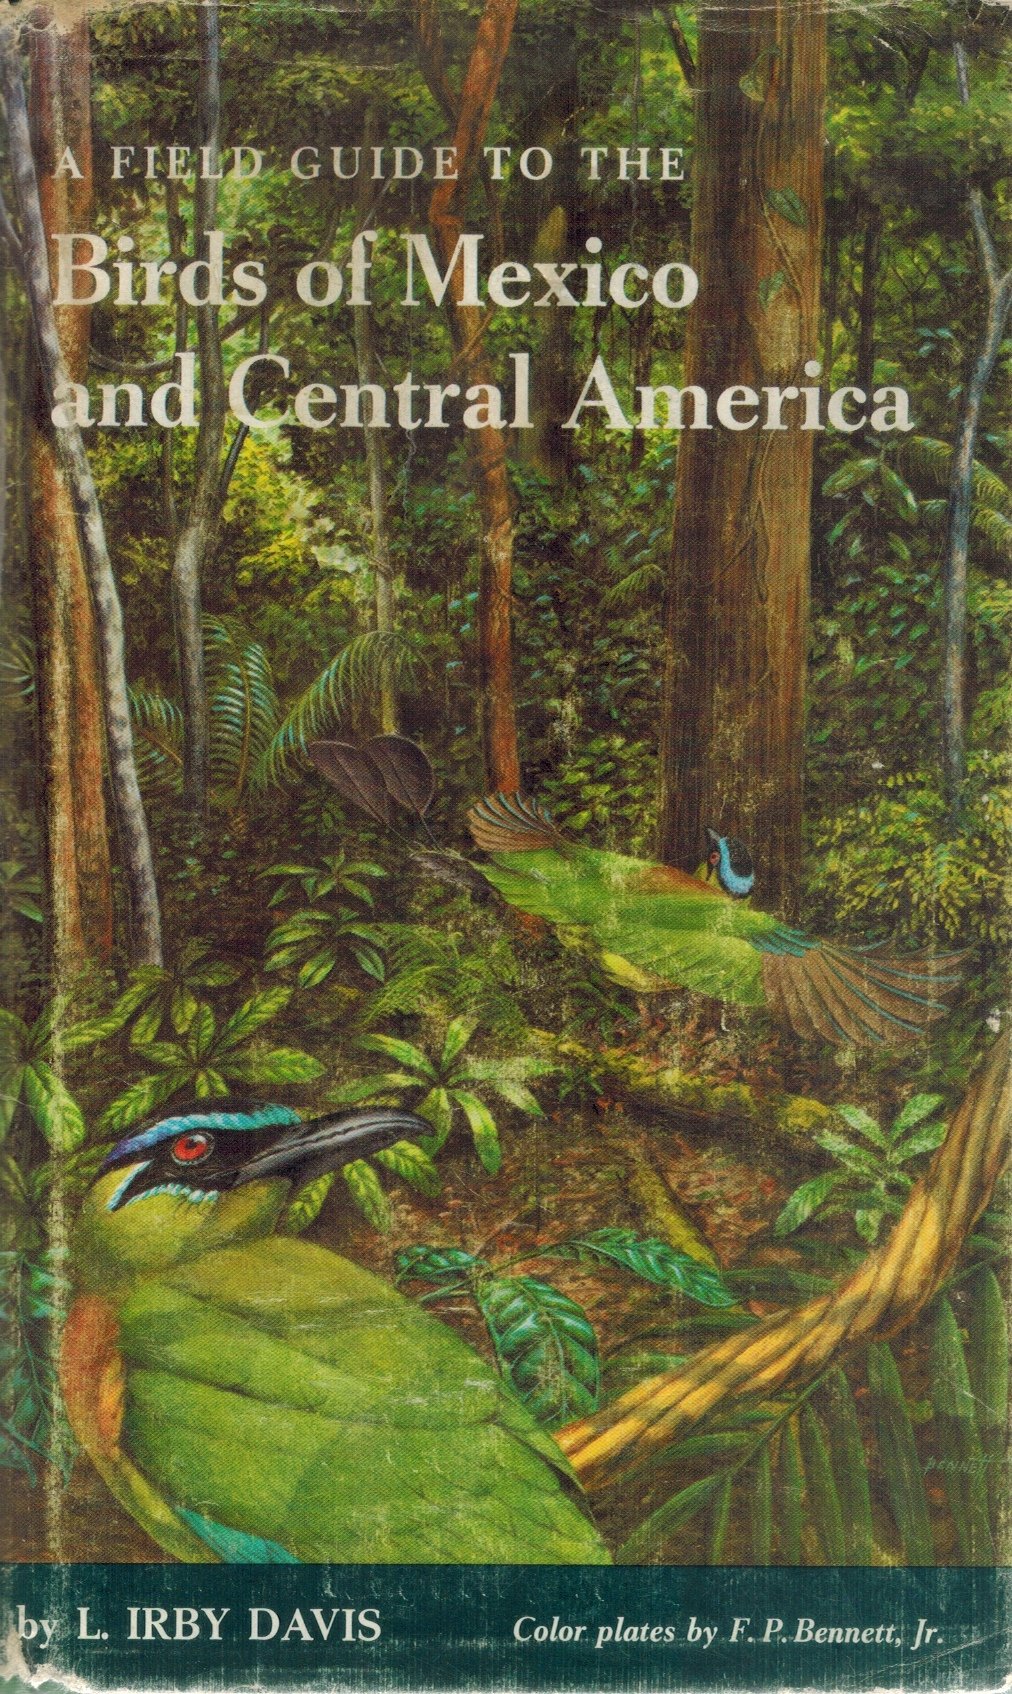 FIELD GUIDE TO THE BIRDS OF MEXICO AND CENTRAL AMERICA  by Davis, Louie Irby